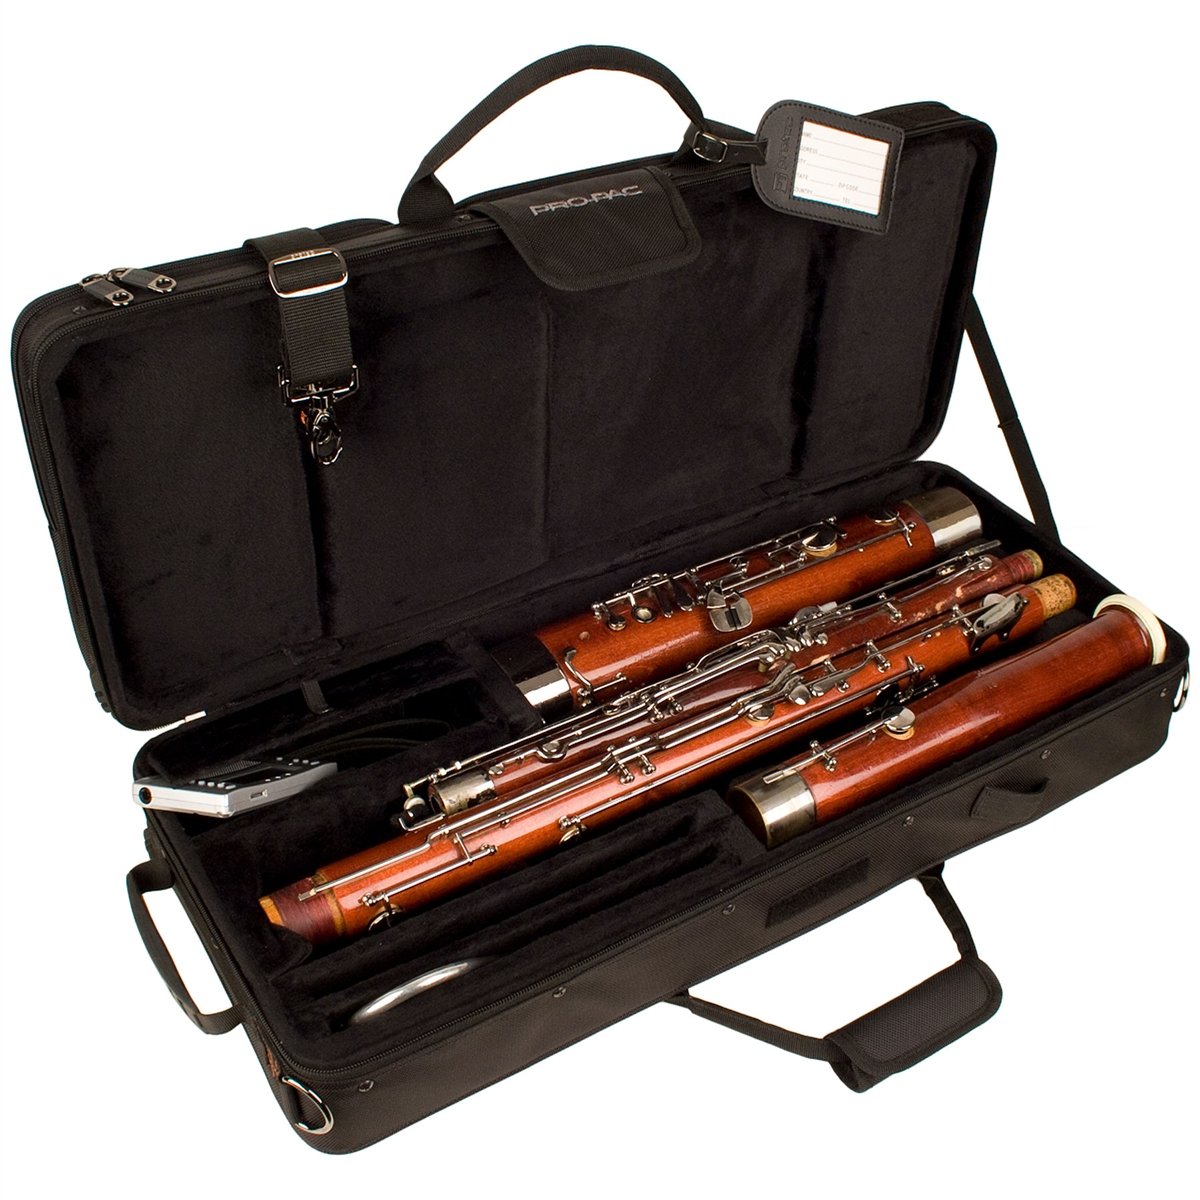 Protec - Bassoon PRO PAC Case-Accessories-Protec-Music Elements